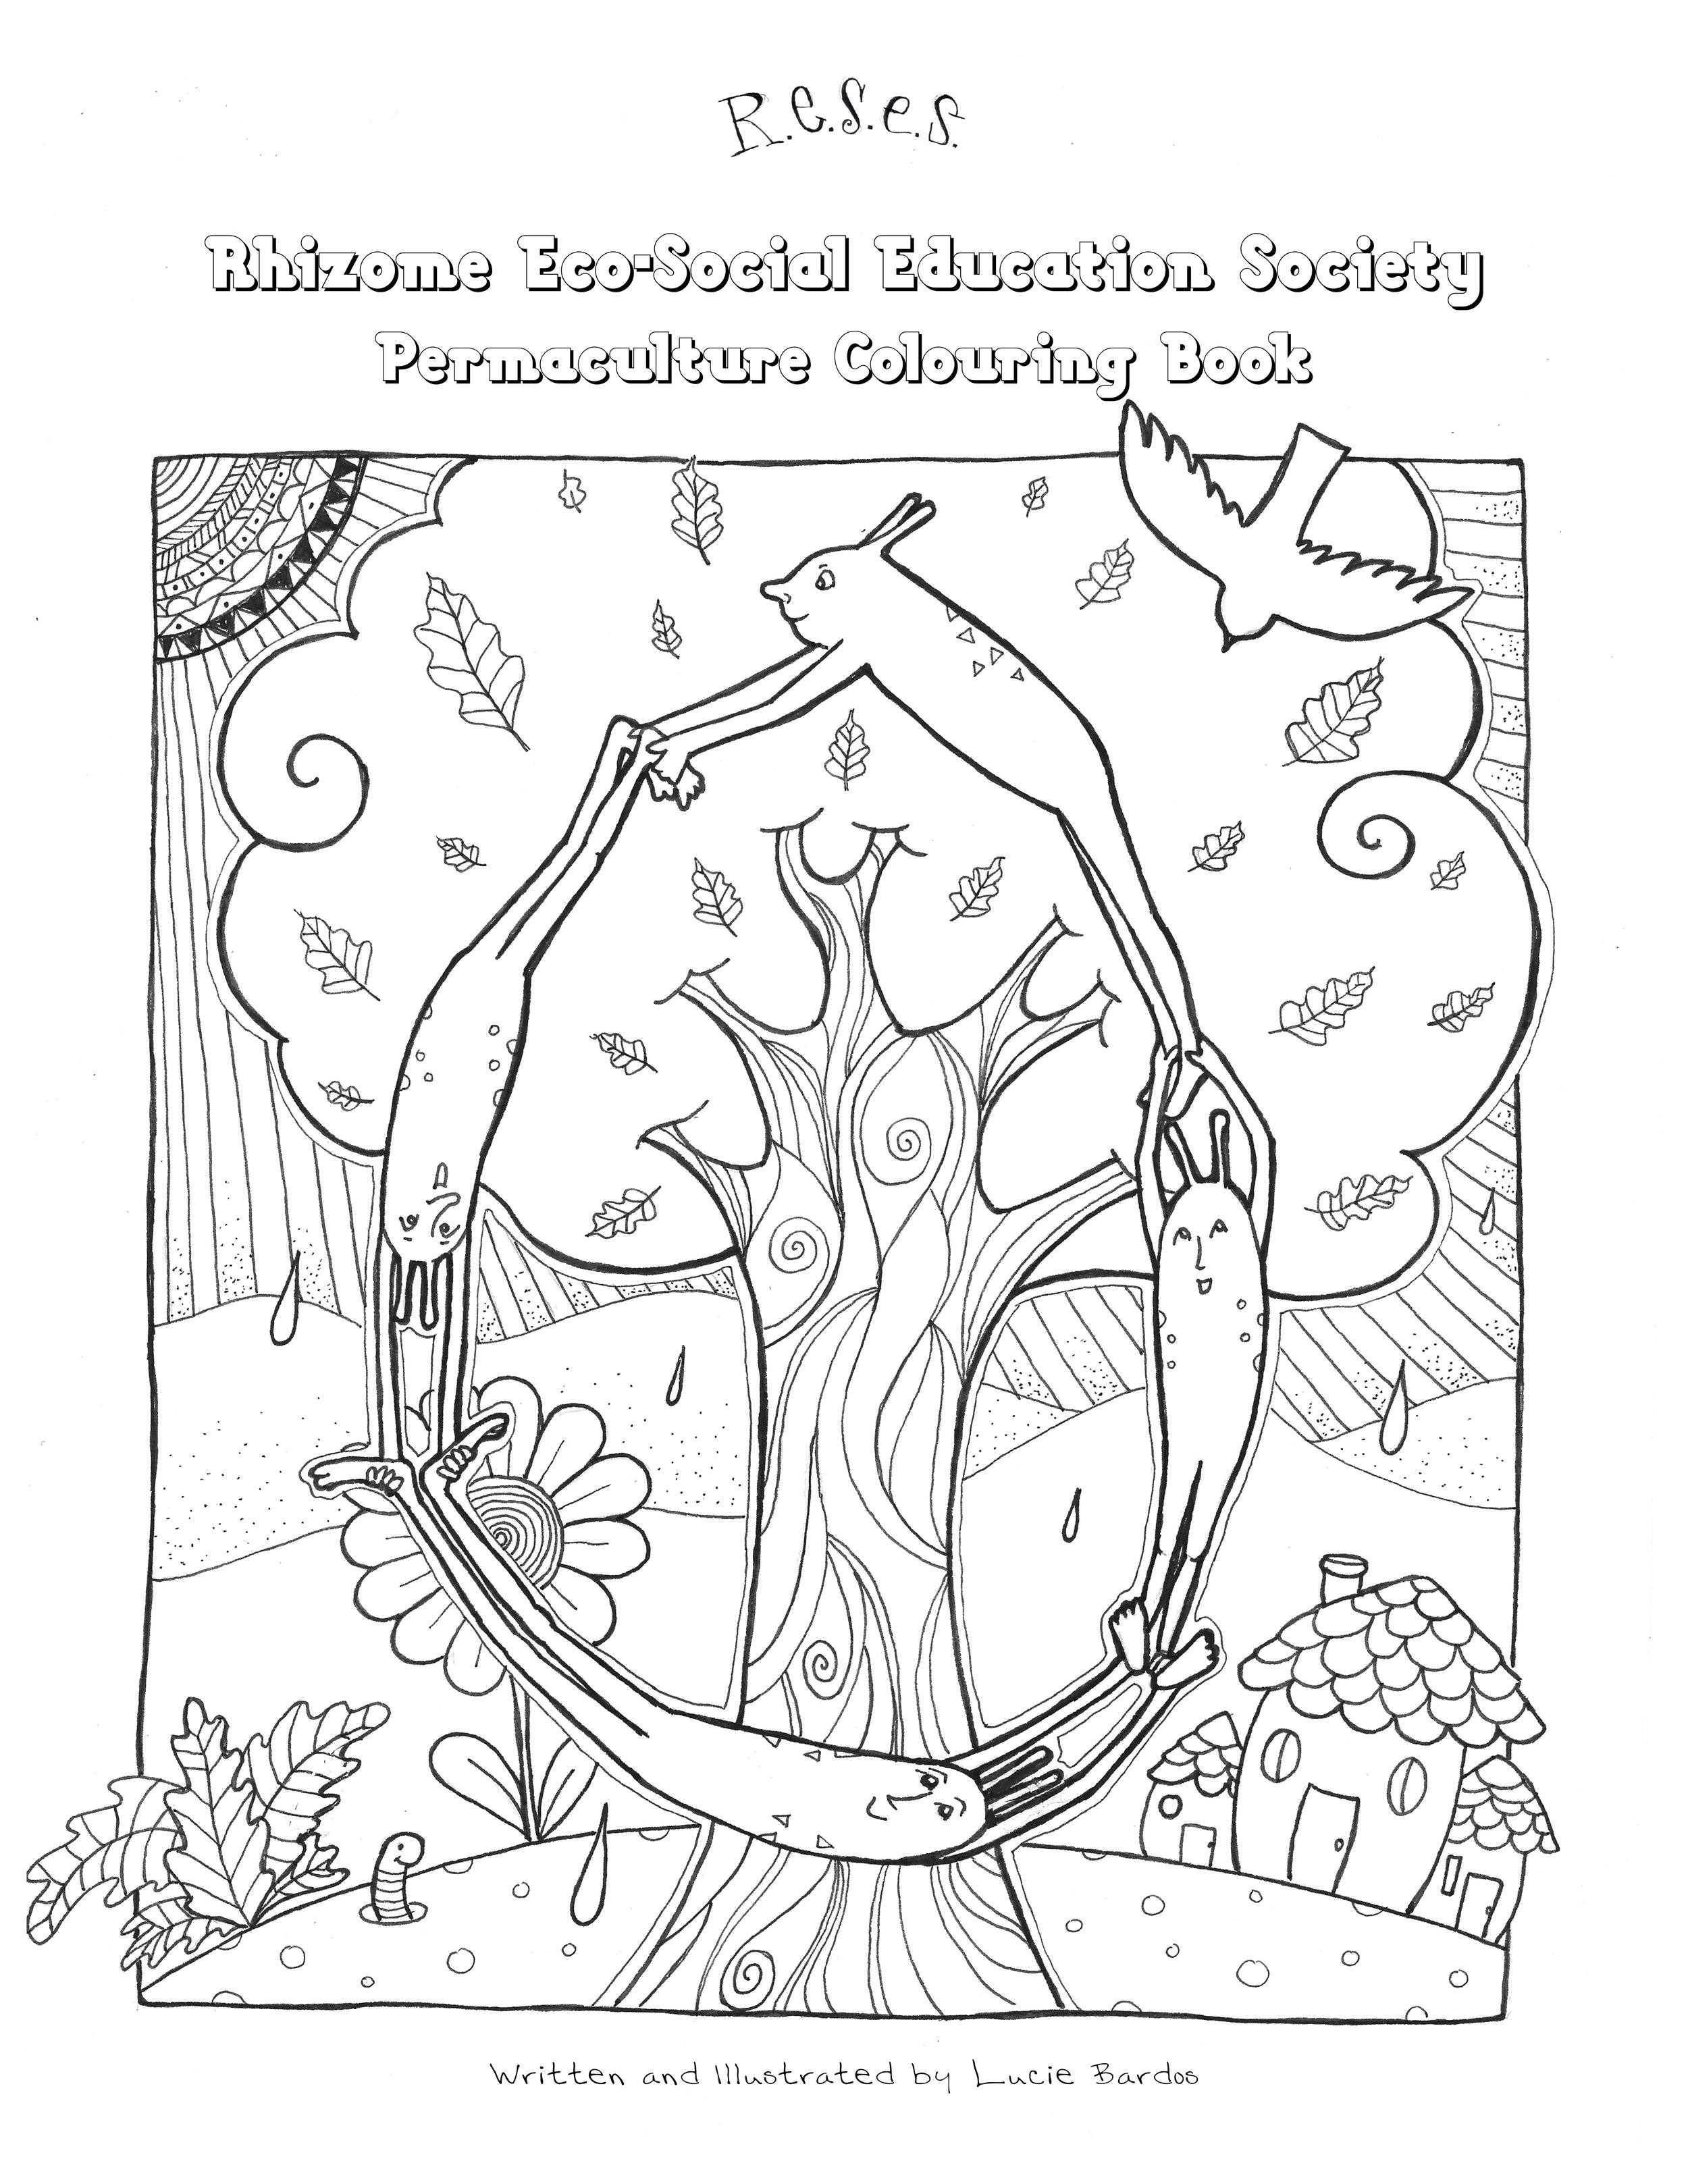 RESES Permaculture Colouring Book Front Cover.jpg